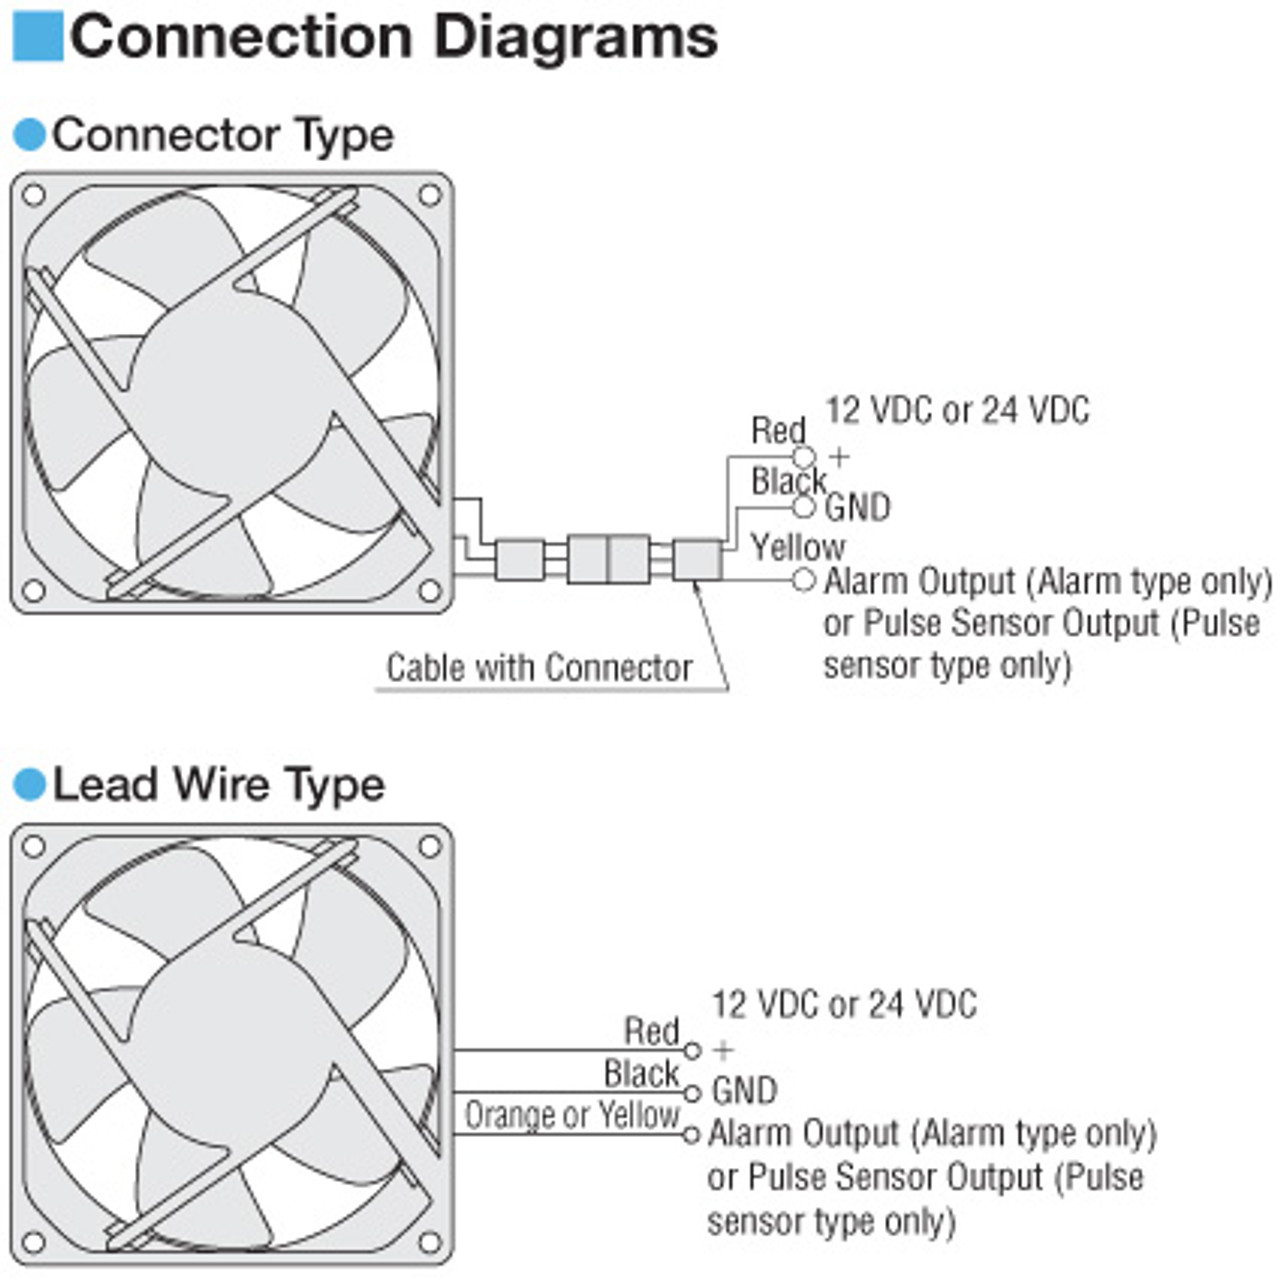 MD925A-24LH - Connection